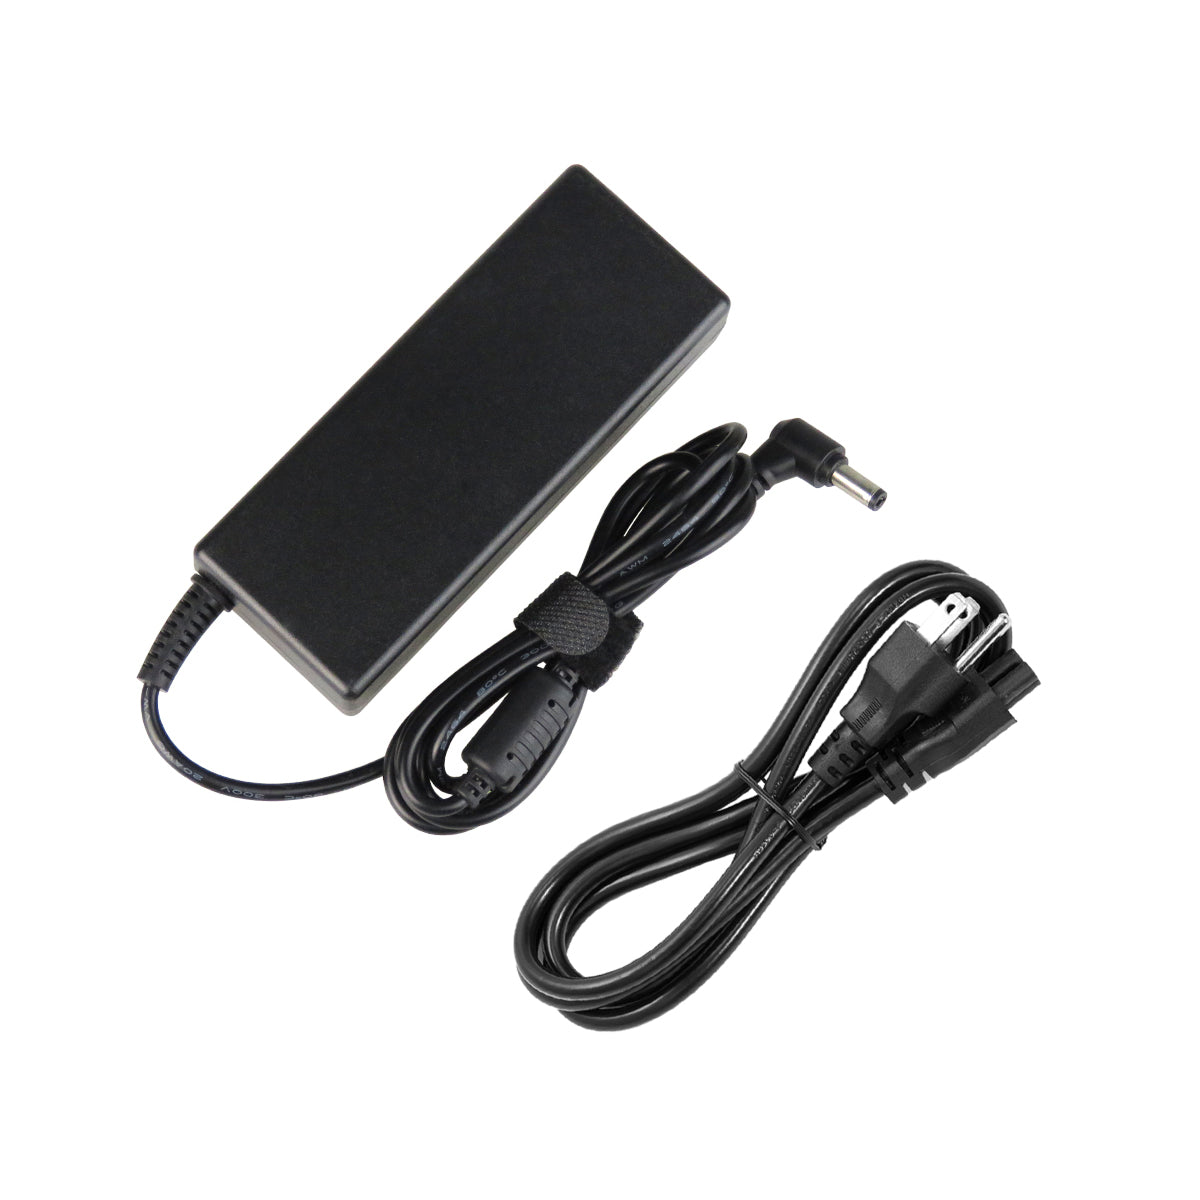 AC Adapter Charger for ASUS K61C Laptop.